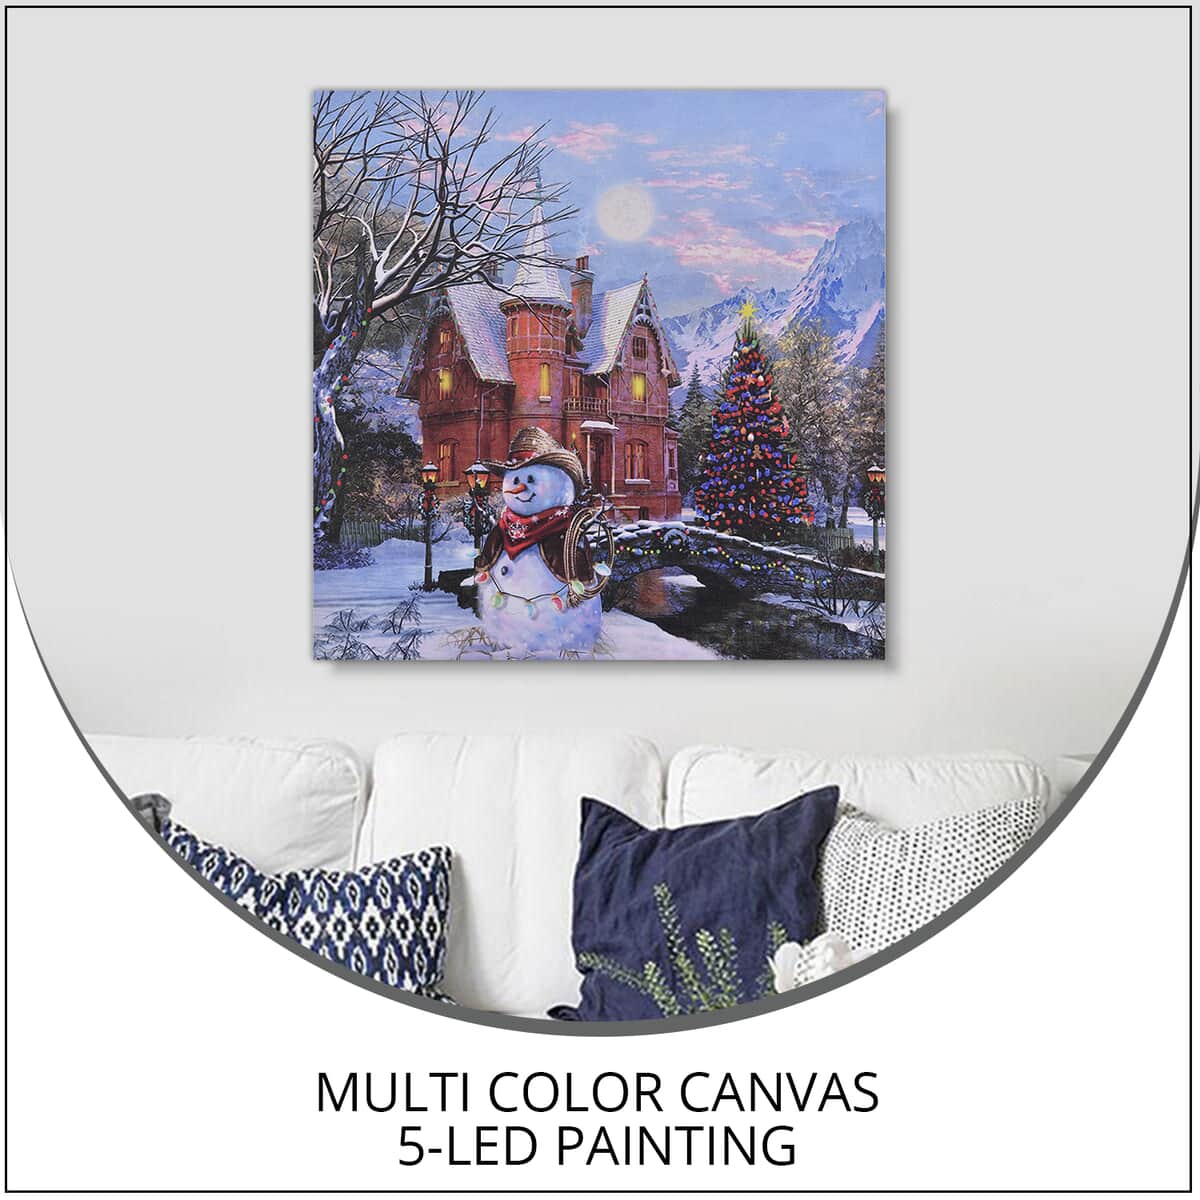 HOMESMART Multi Color Canvas 5-LED Snowman and House Painting (9.84"x0.019"x9.84") (2xAA Battery Not Included) image number 1